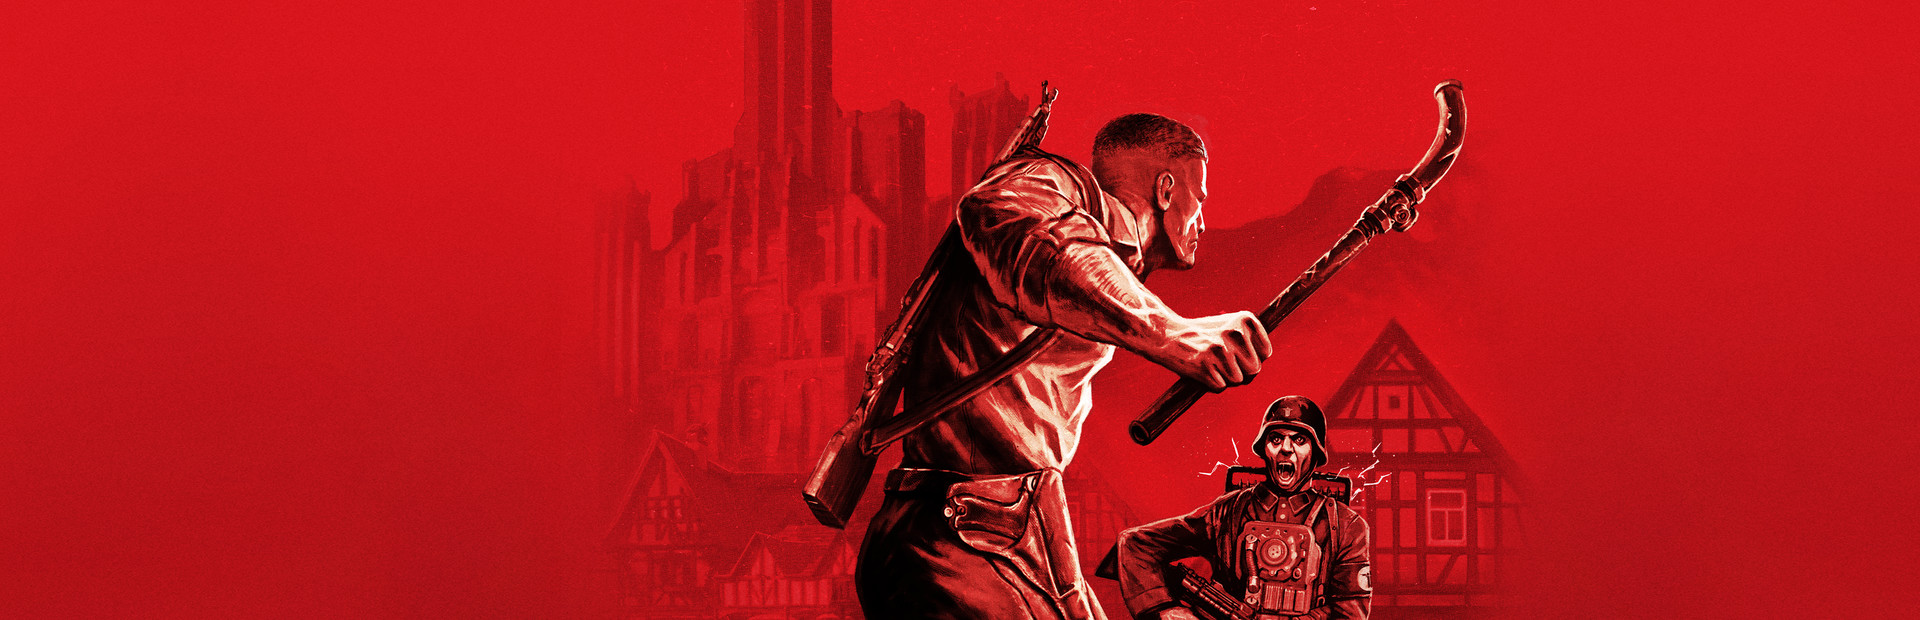 Wolfenstein: The Old Blood cover image